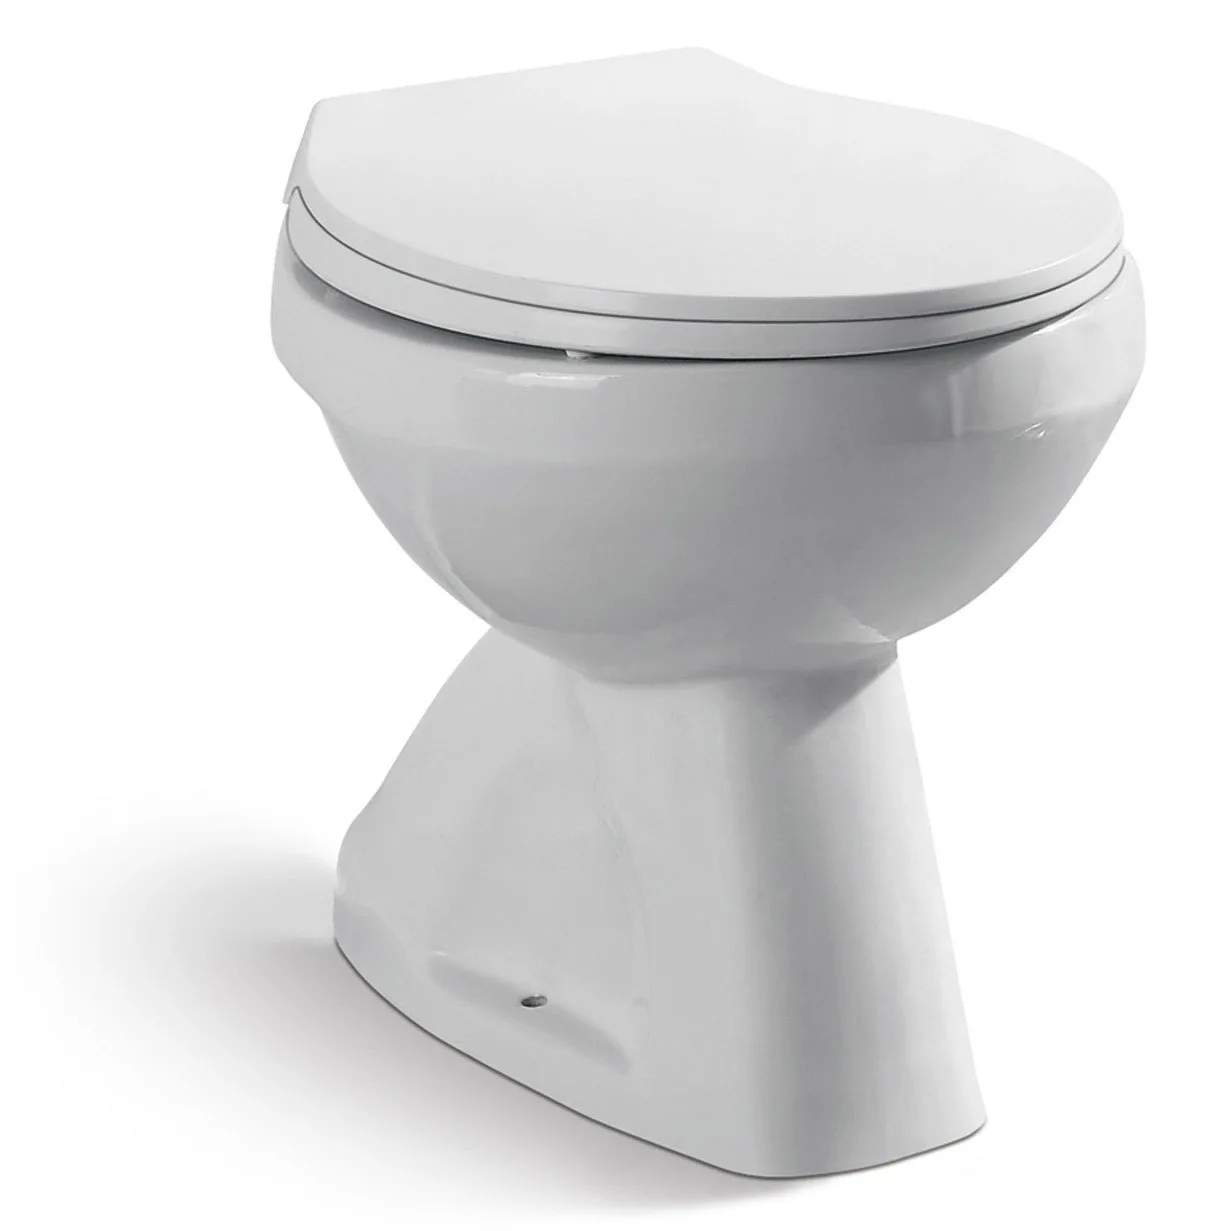 madalena toilet bowl, cheapest price Angola toilet, without watertank separate china largest supplier